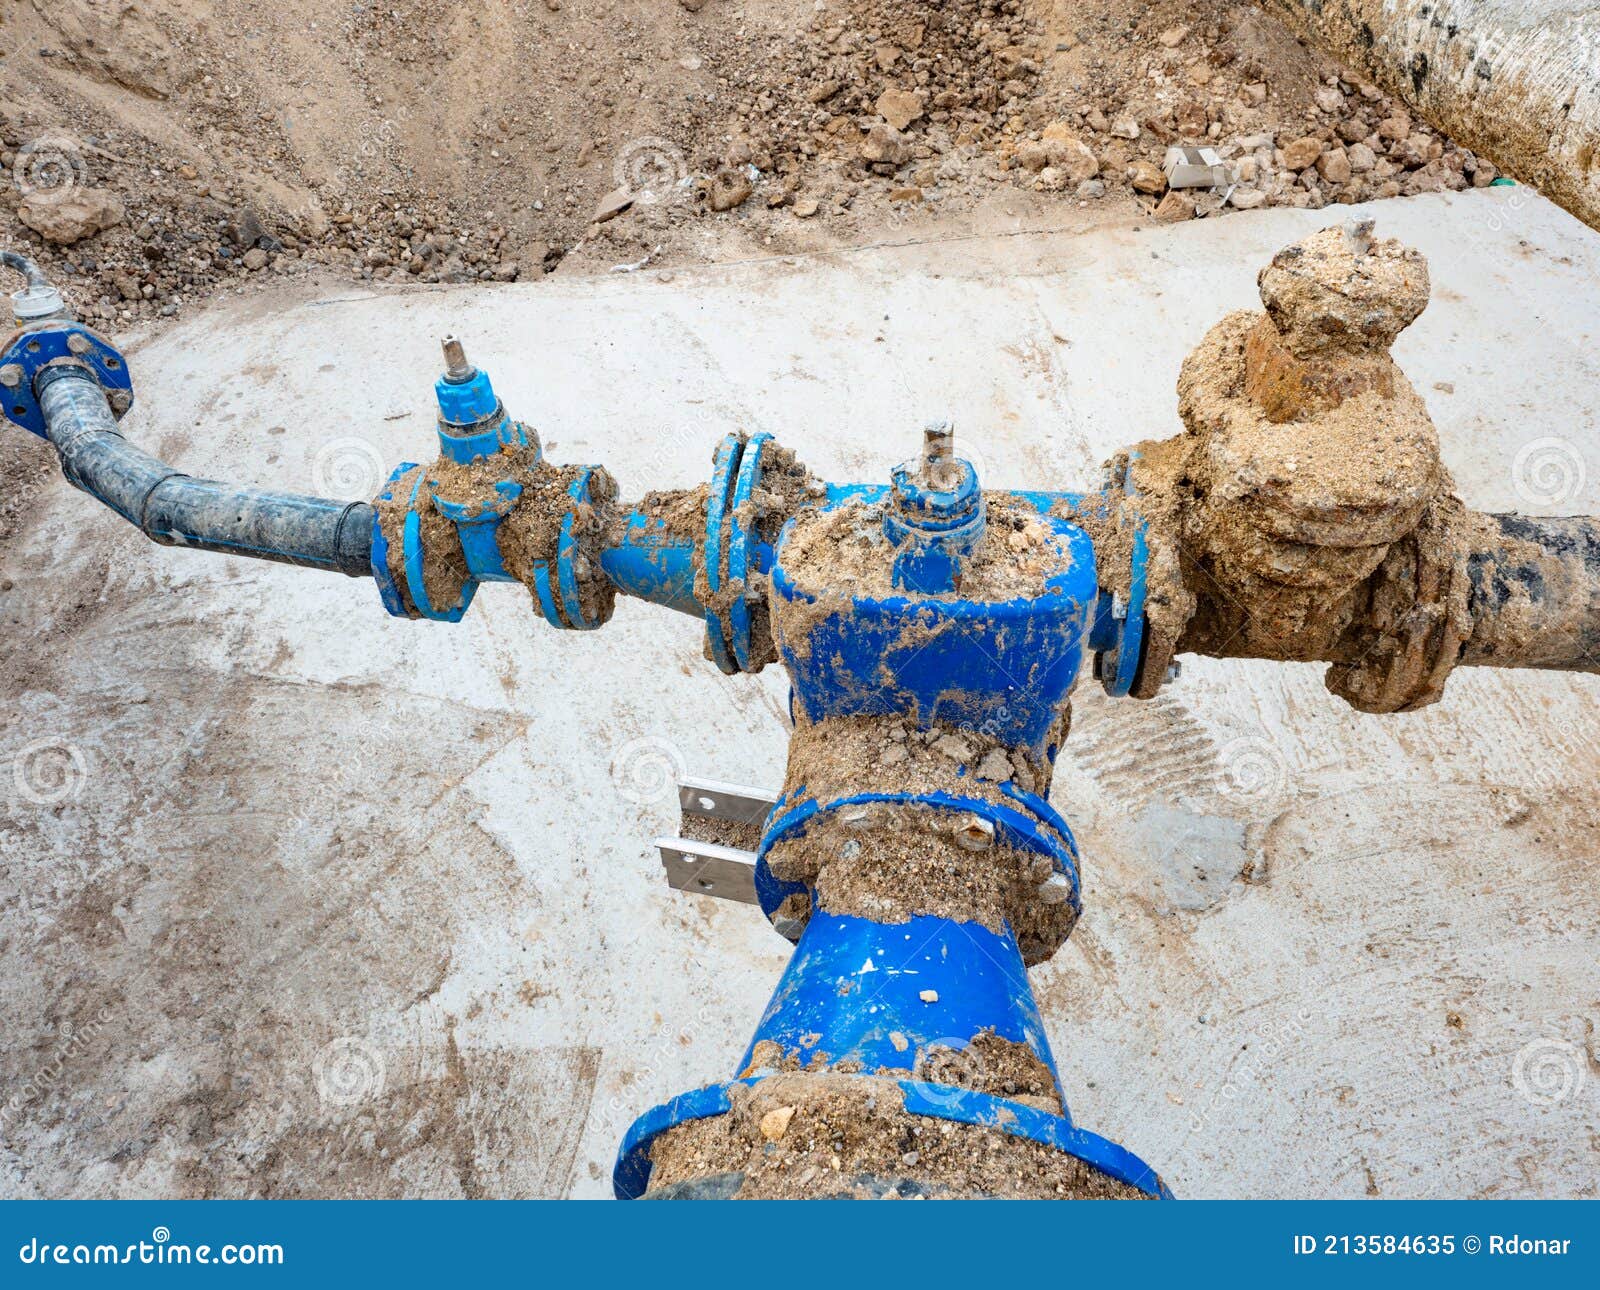 Pipeline with Valves Connect Pumps Used To Fresh Water at Public Utility Stock Image - Image of leaking, pipeline: 213584635